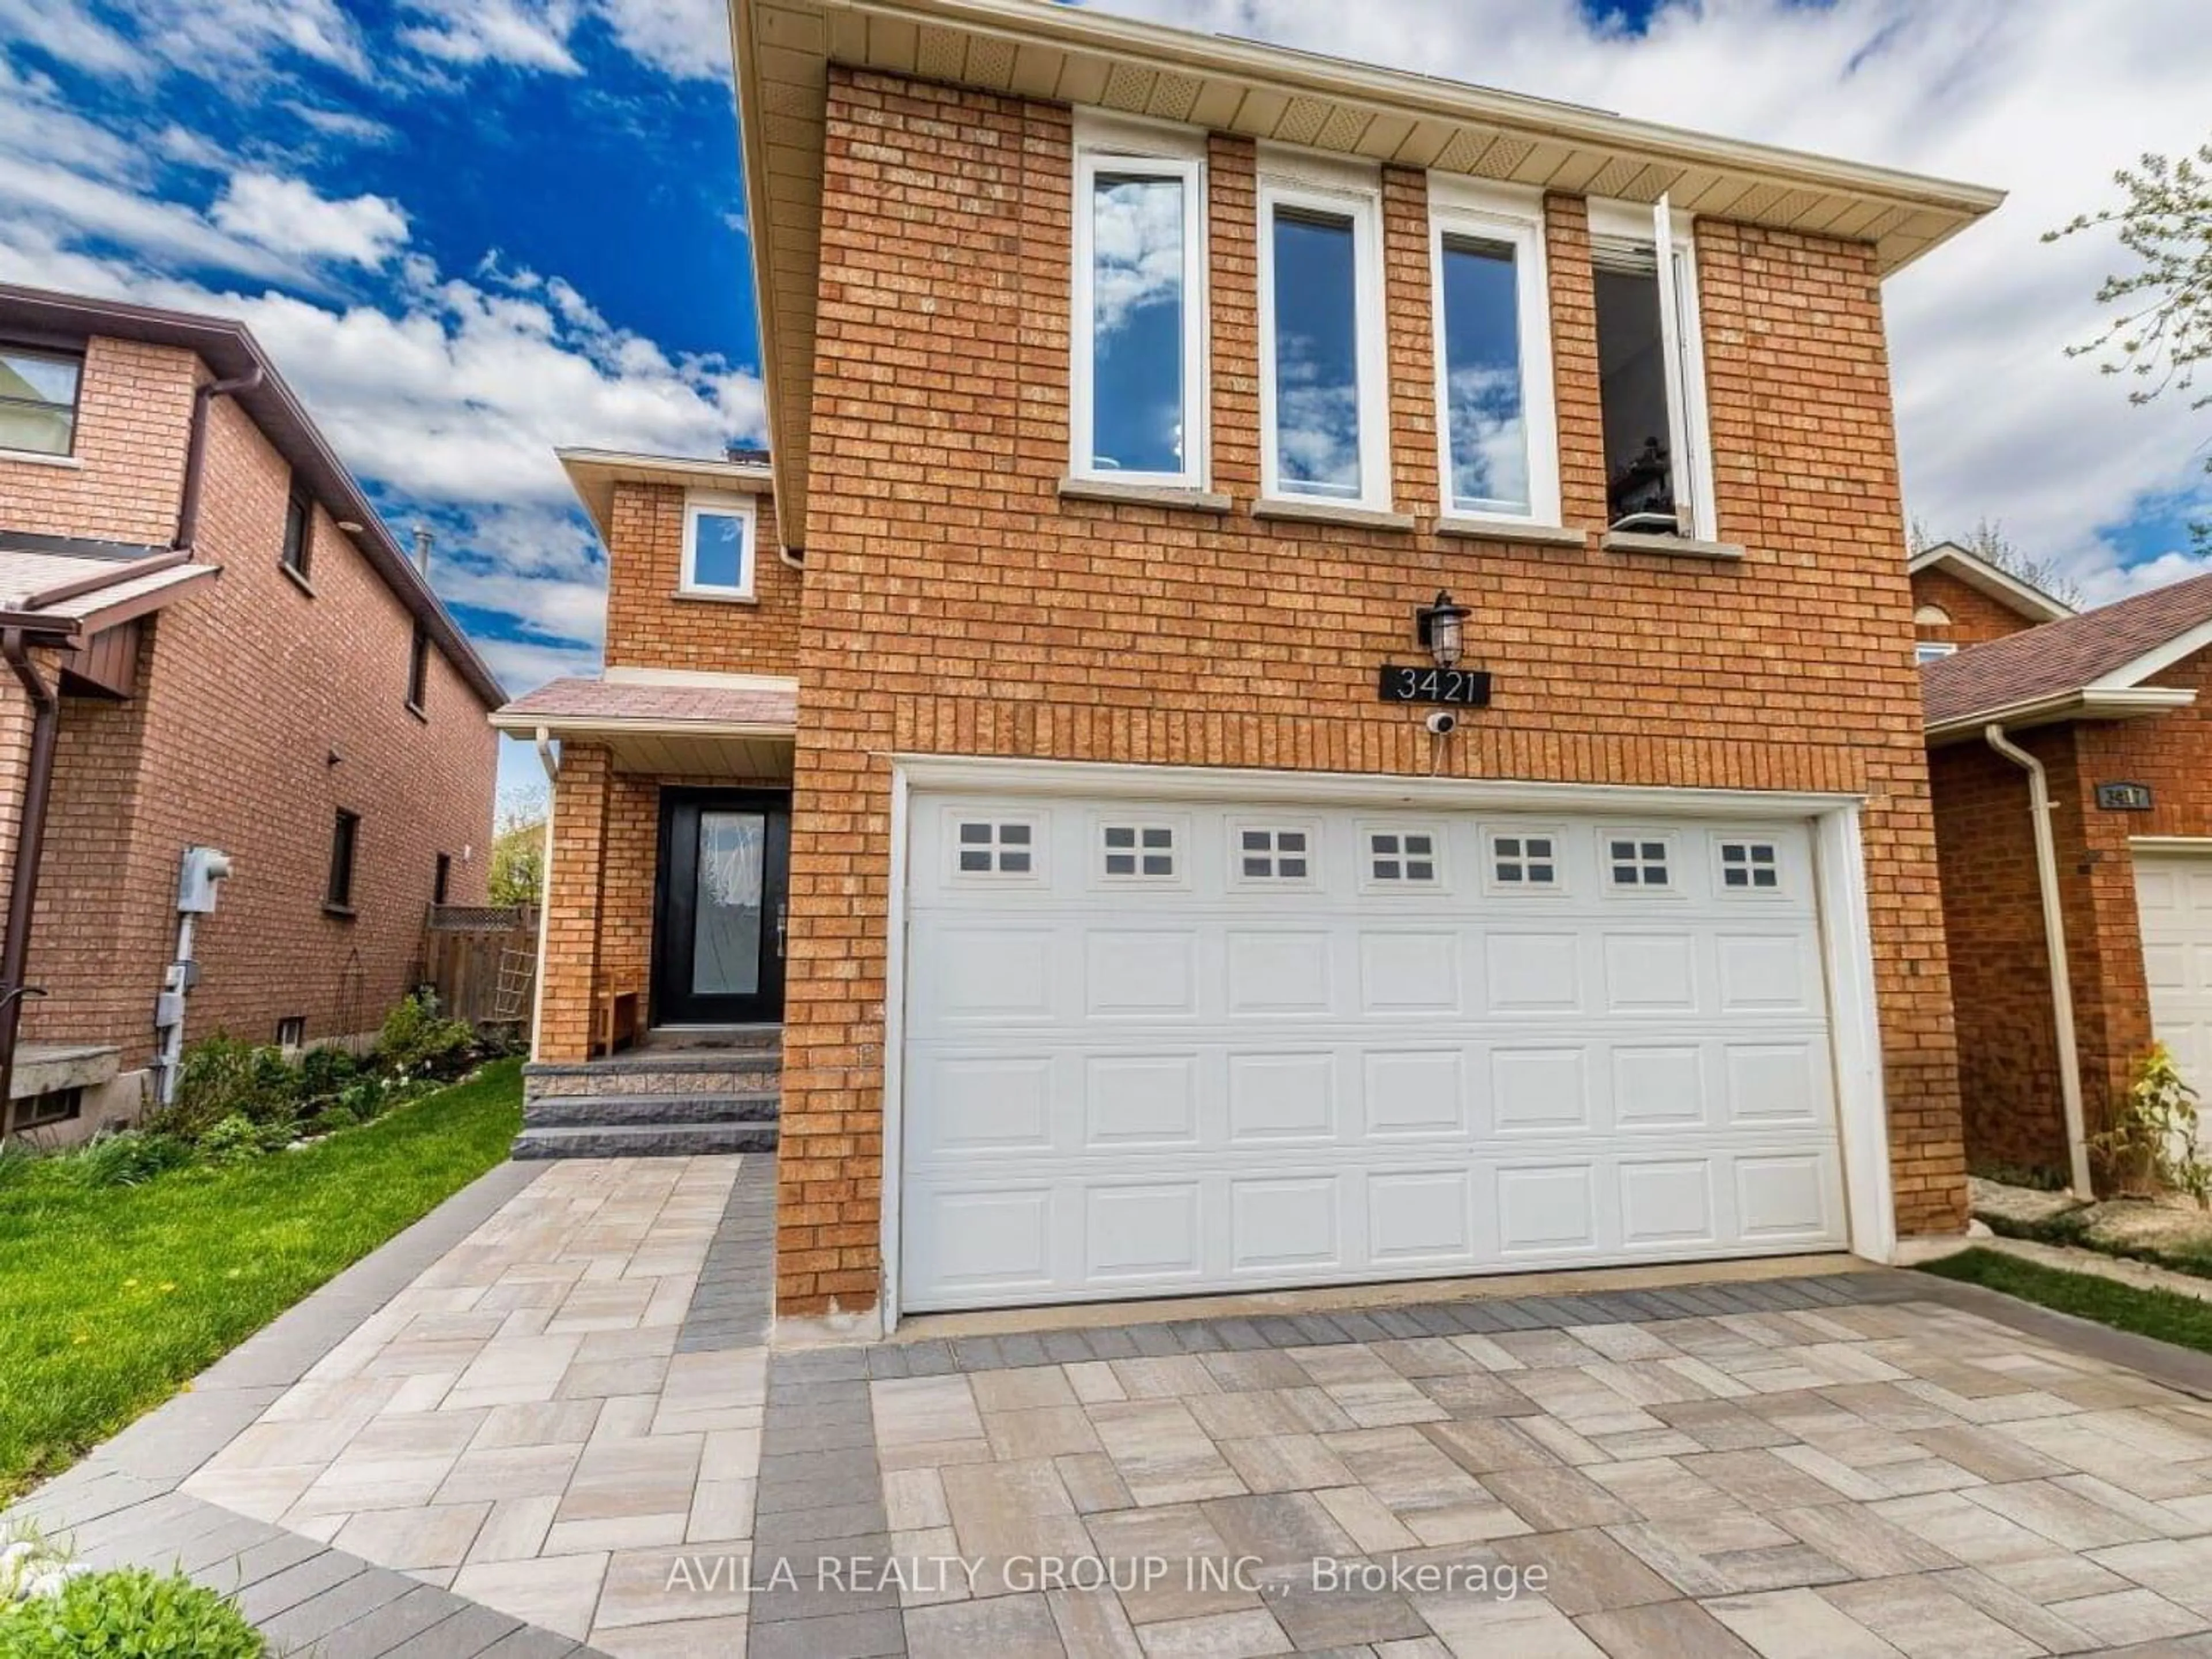 Home with brick exterior material for 3421 Halstead Rd, Mississauga Ontario L5L 4H2